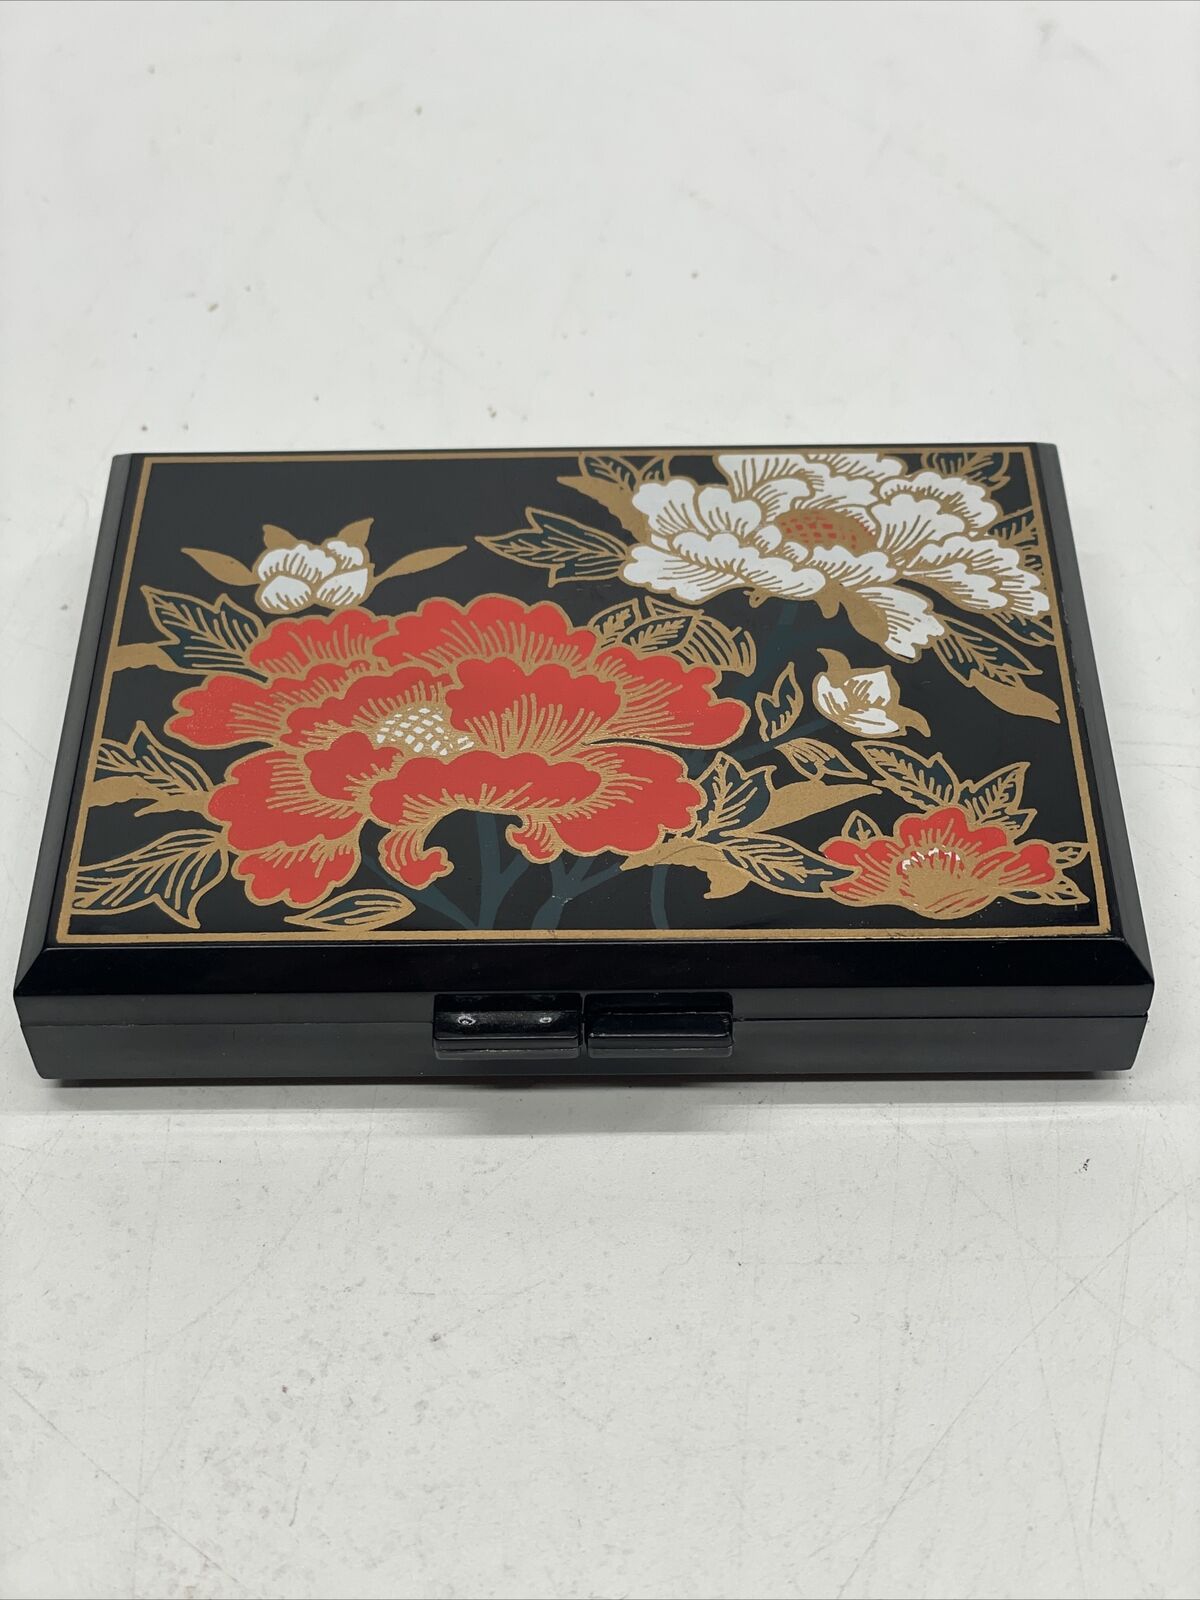 Vintage Japanese Lacquer Tissue Box Mirror Compact Painted Red Gold Floral Black